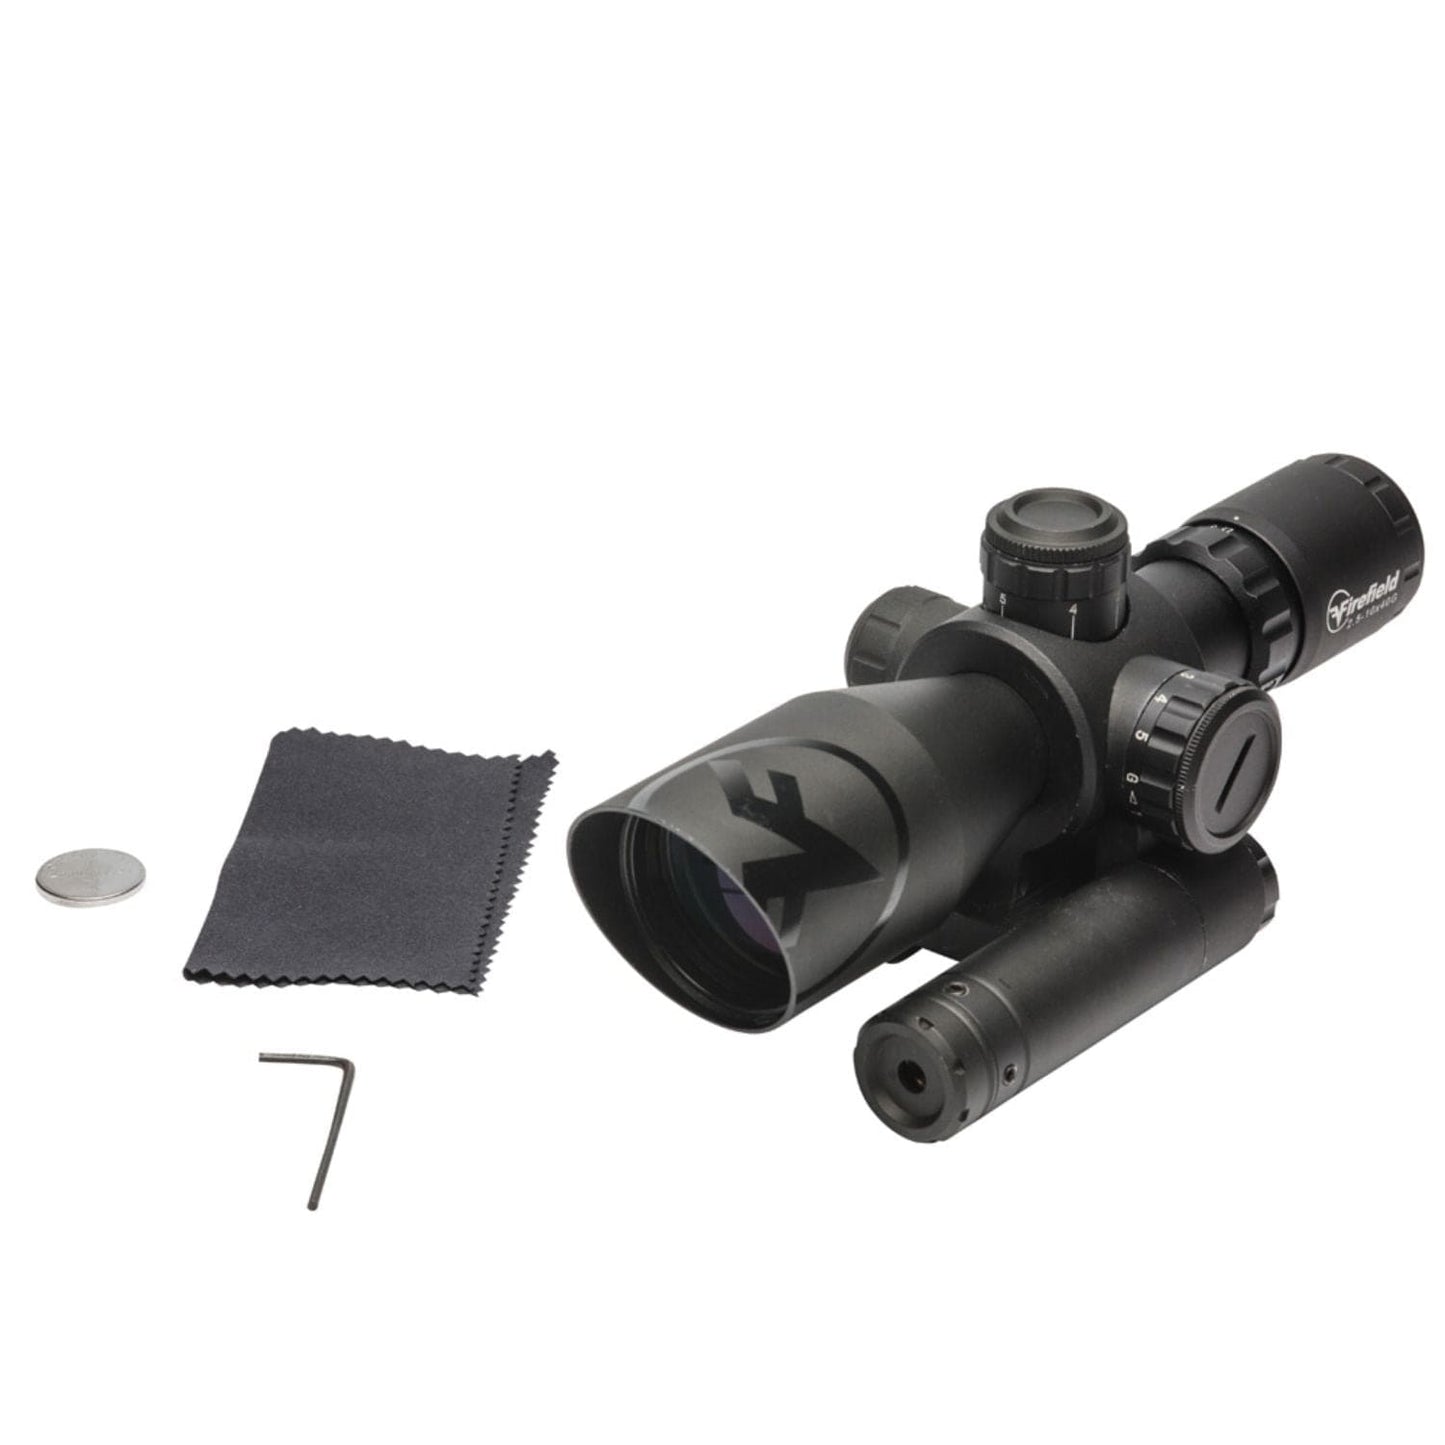 Firefield Barrage Riflescope with Laser by Texas Fowlers